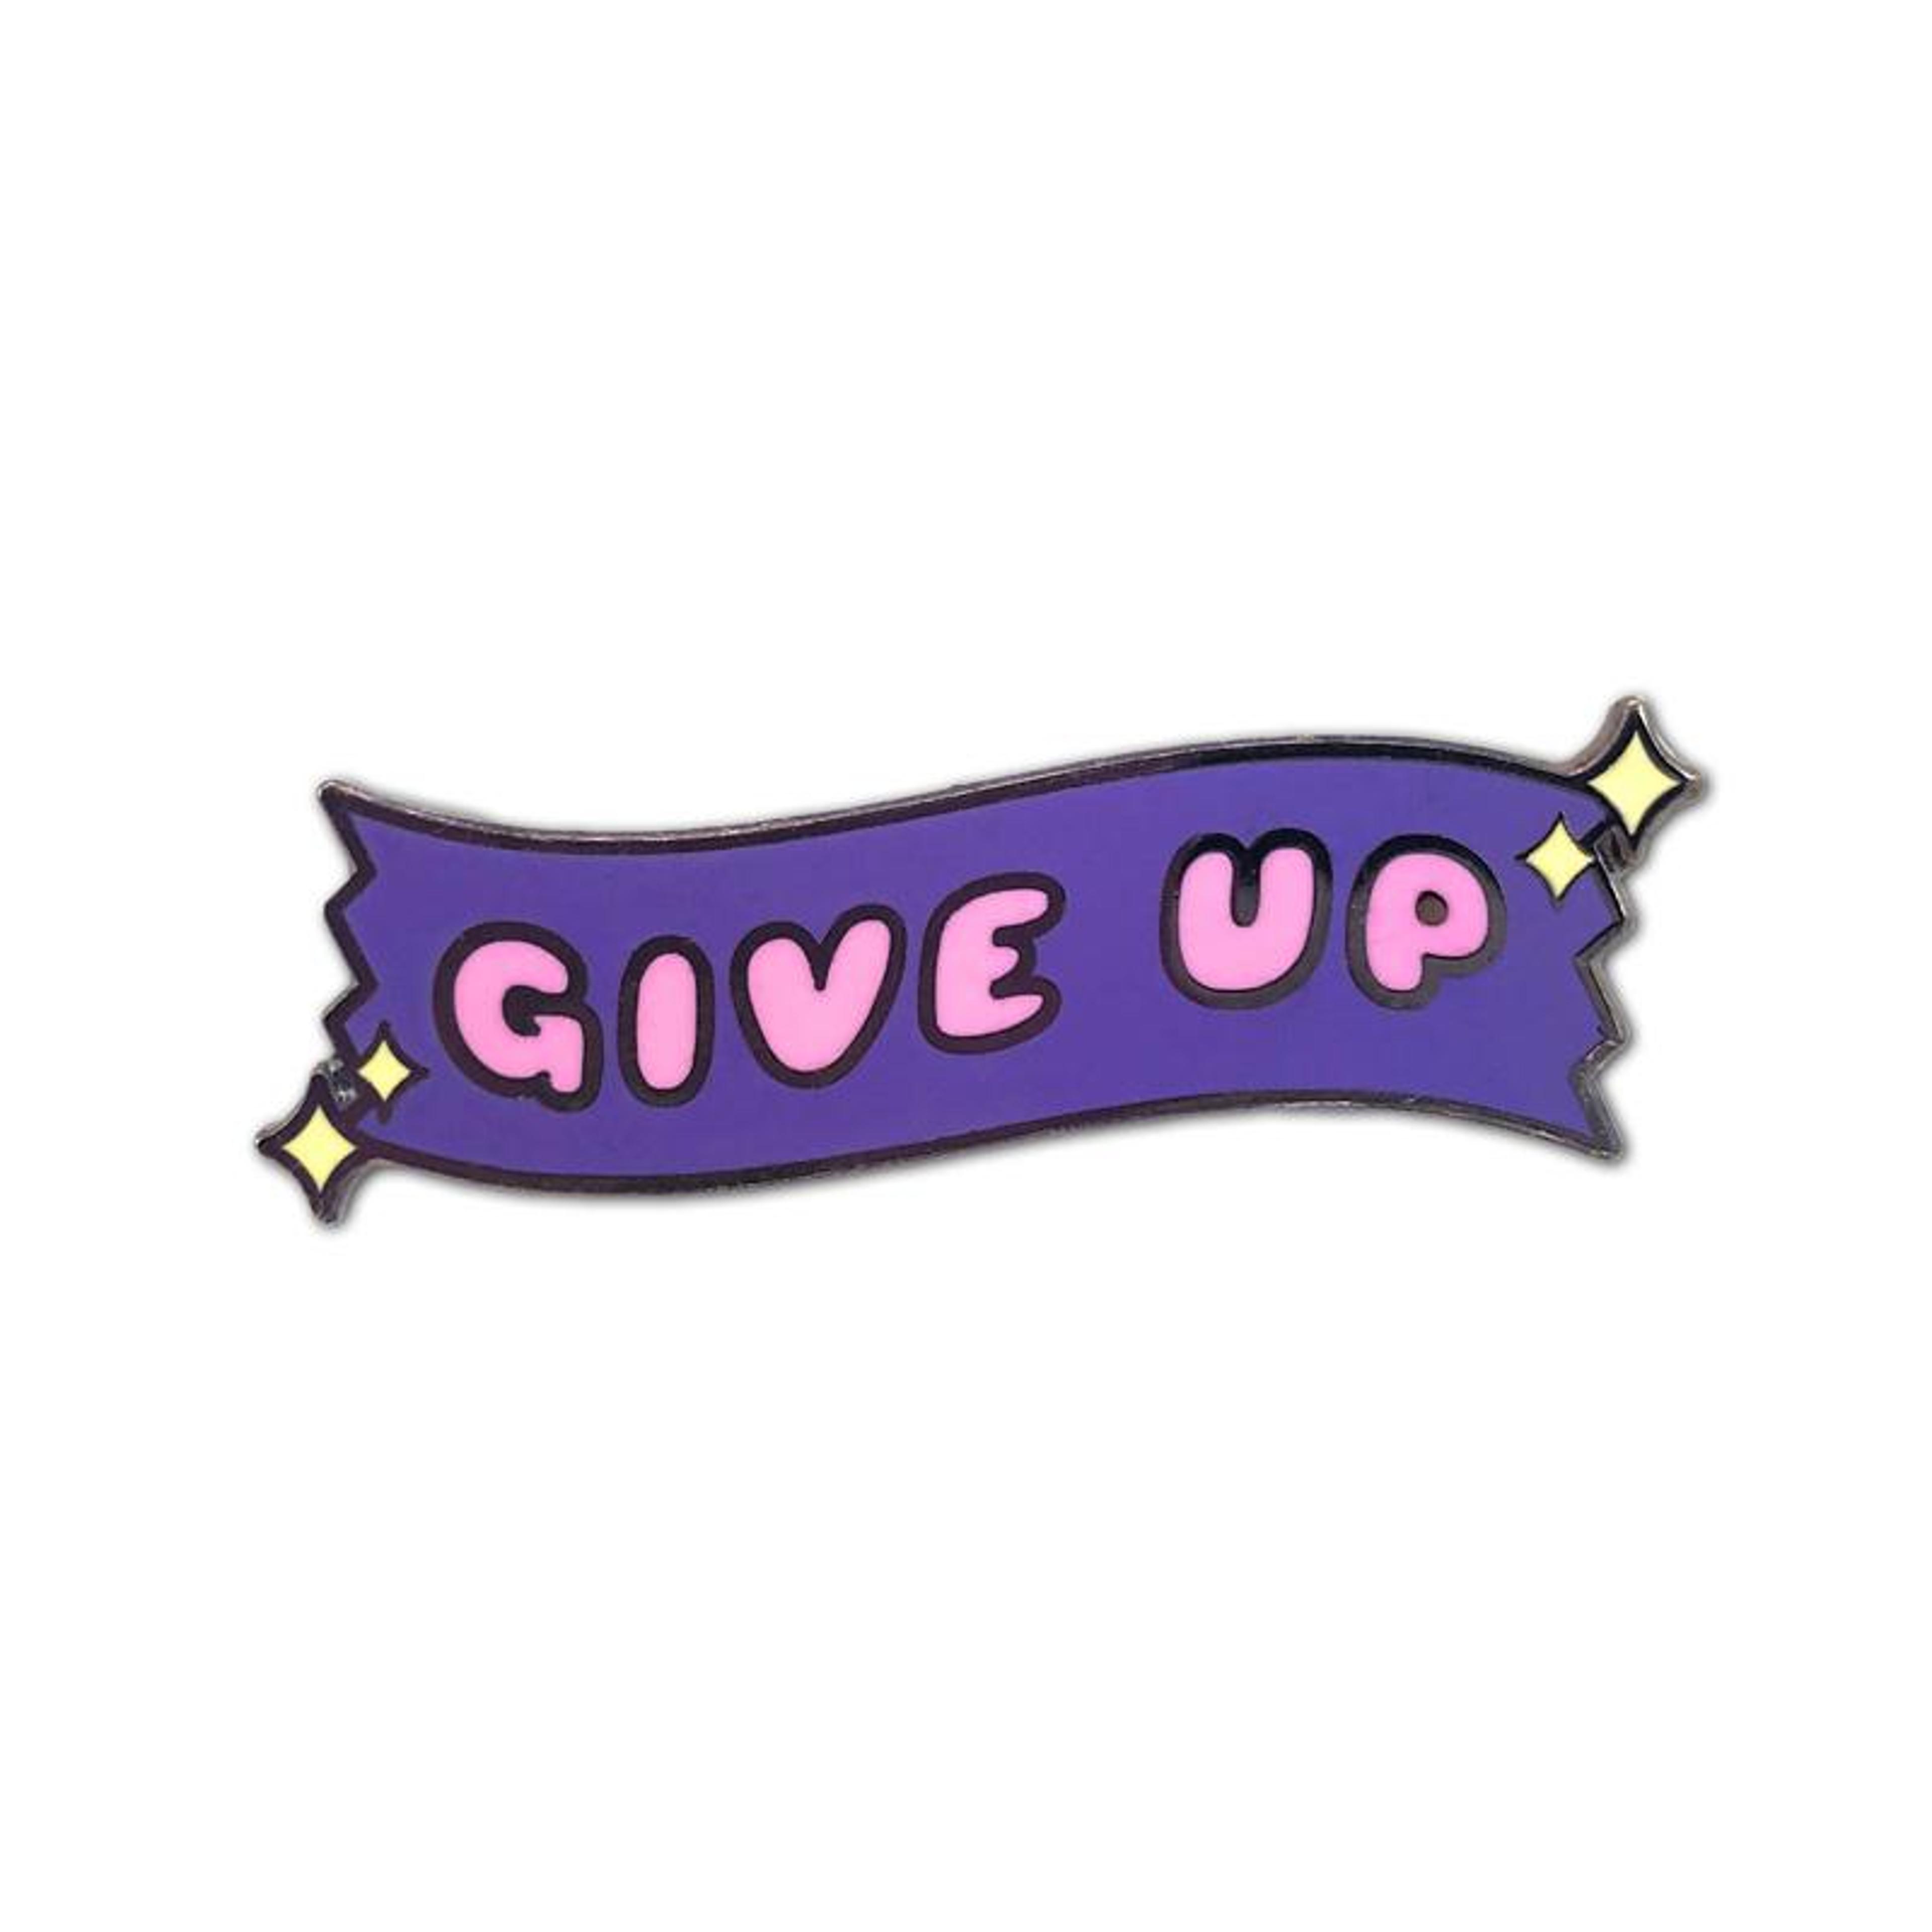 100% Soft Give Up Pin